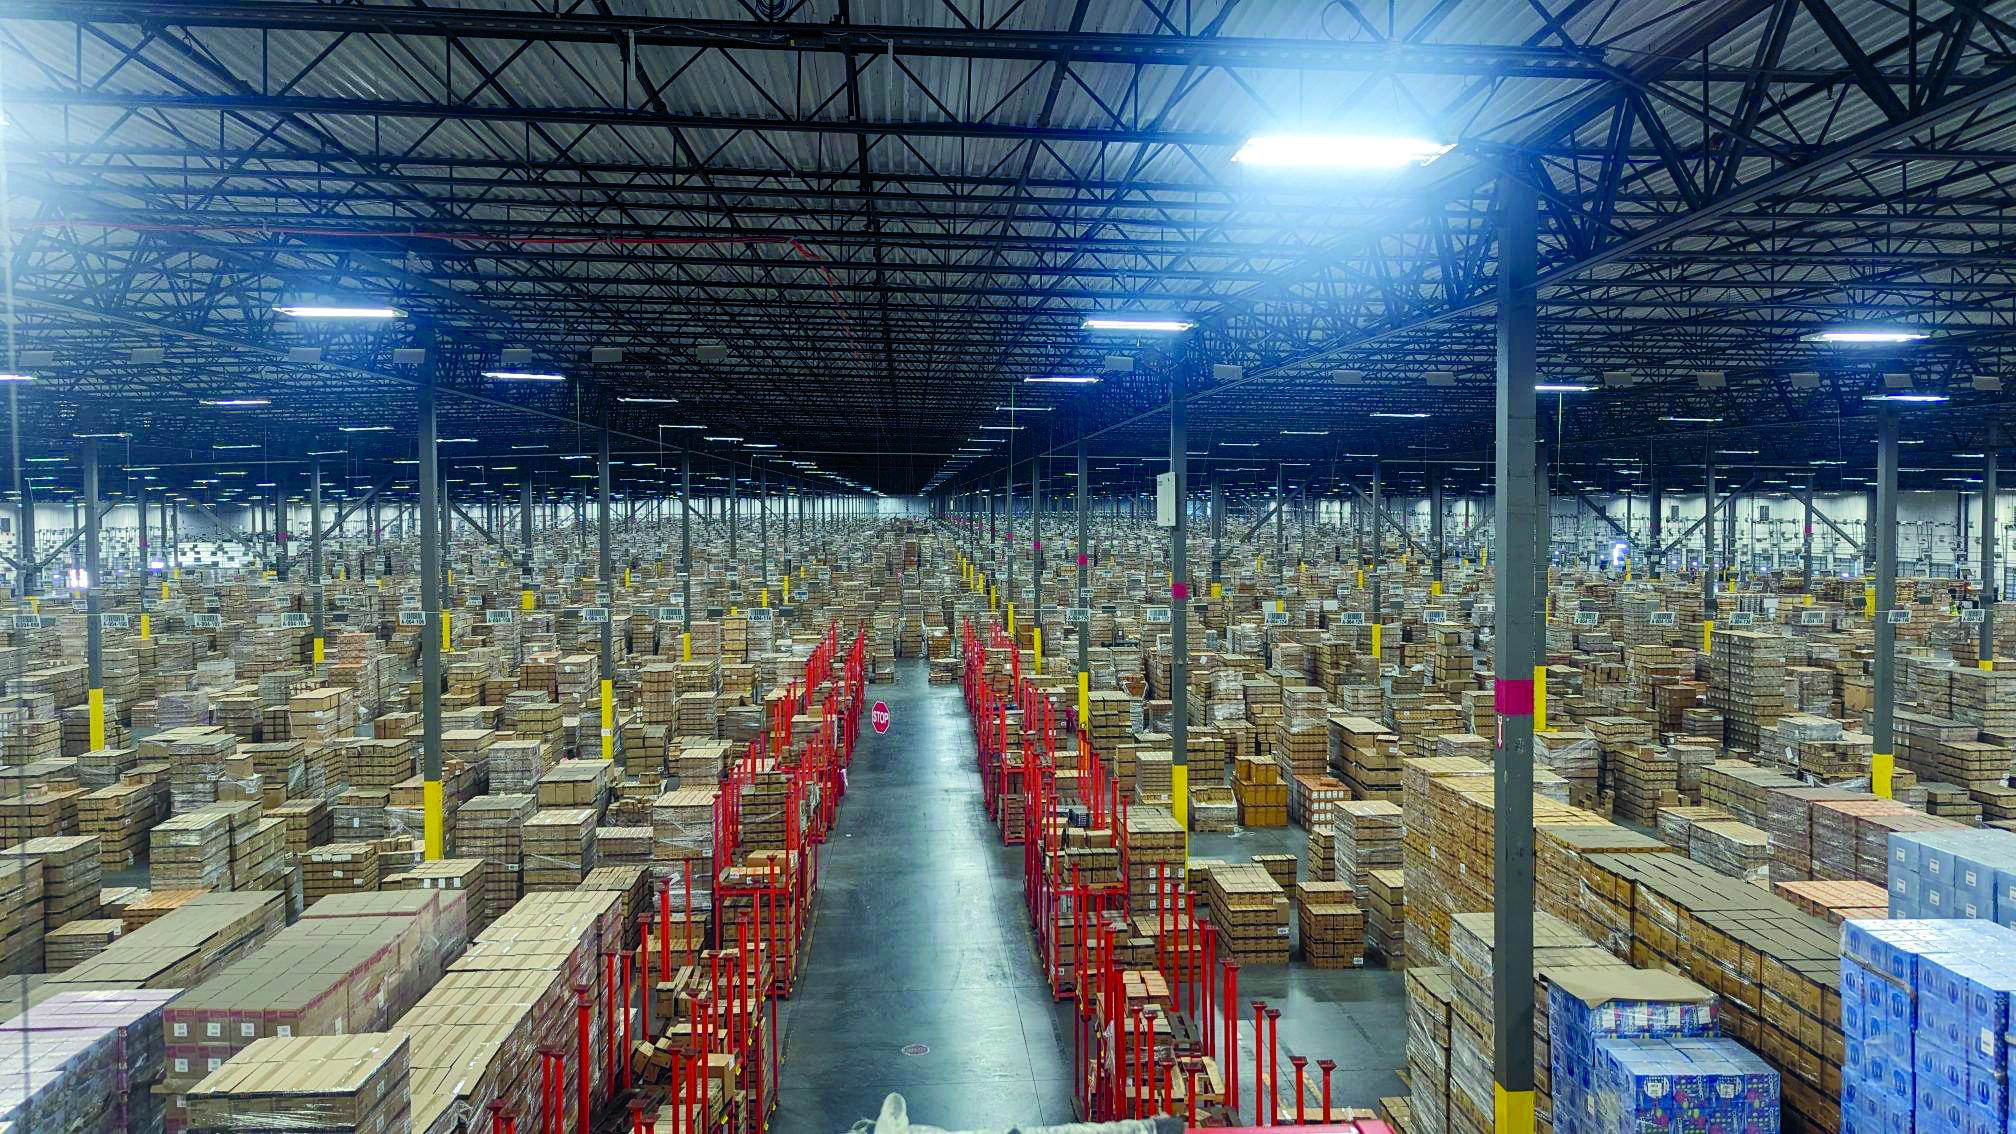 Pallets of brown boxes sit stacked in an expansive high ceiling warehouse.